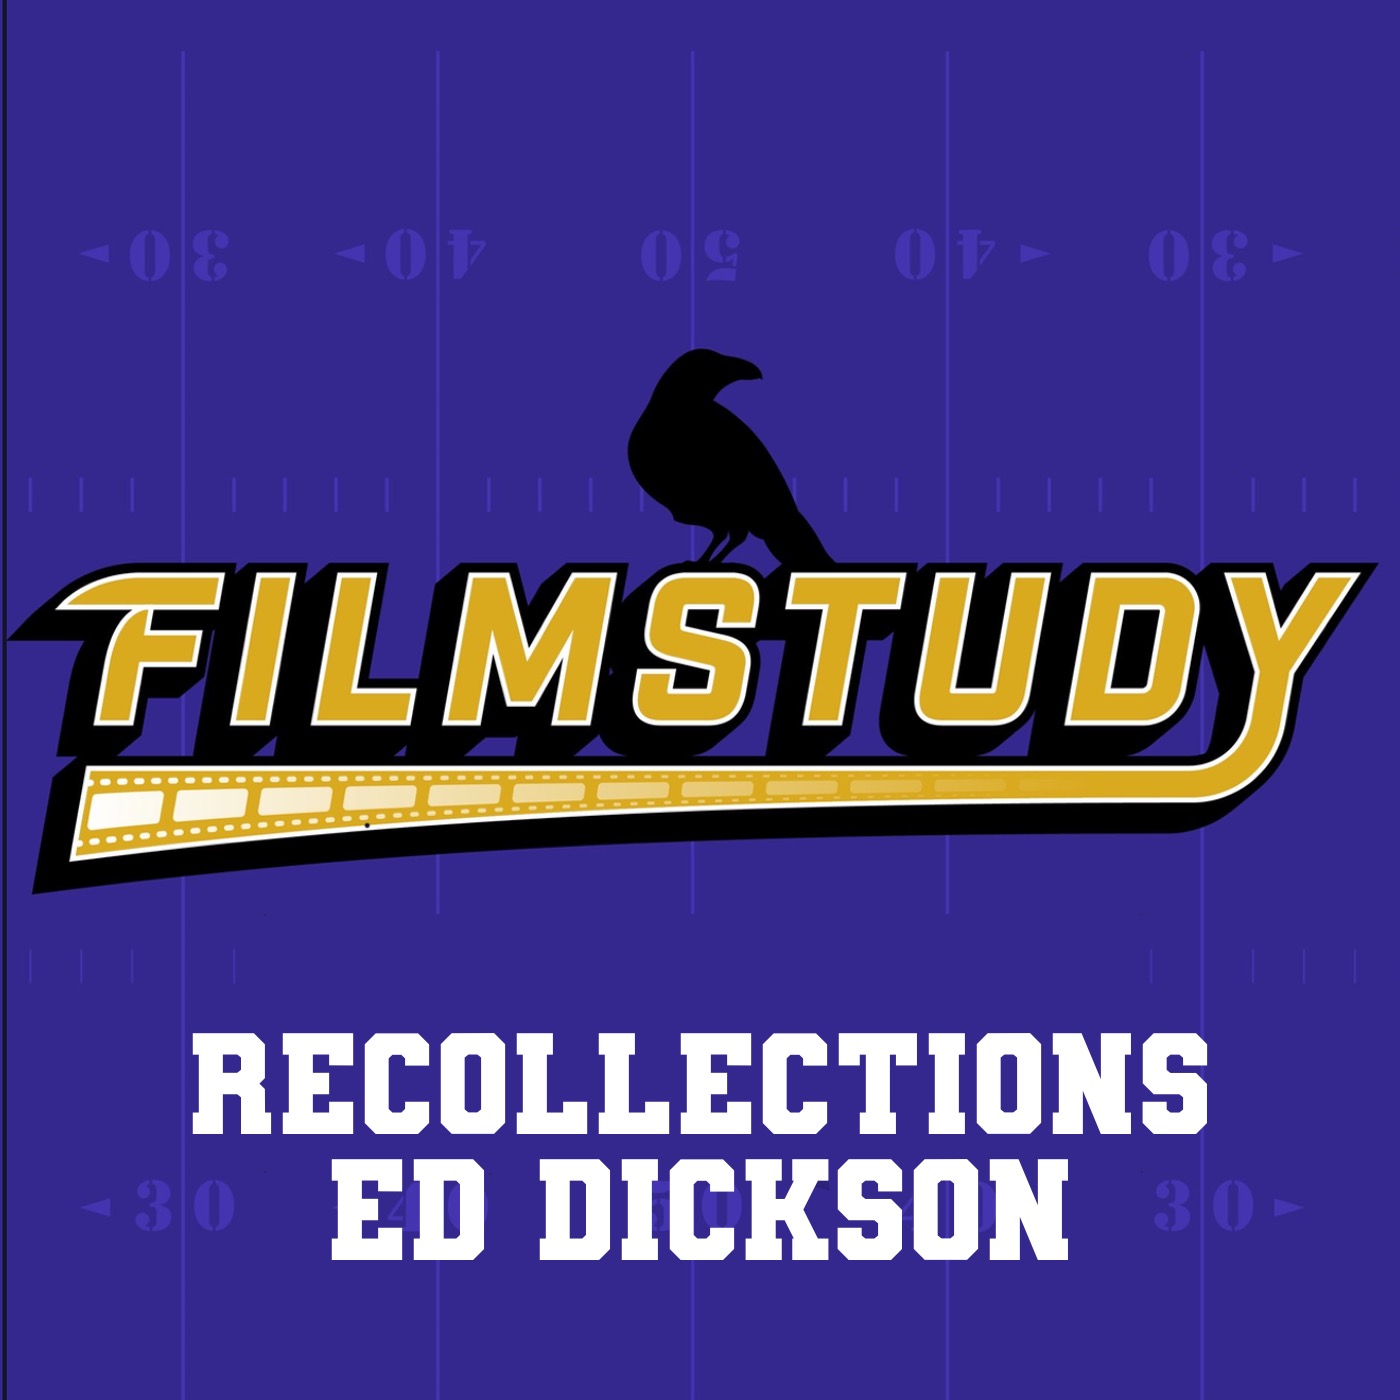 Recollections Ed Dickson